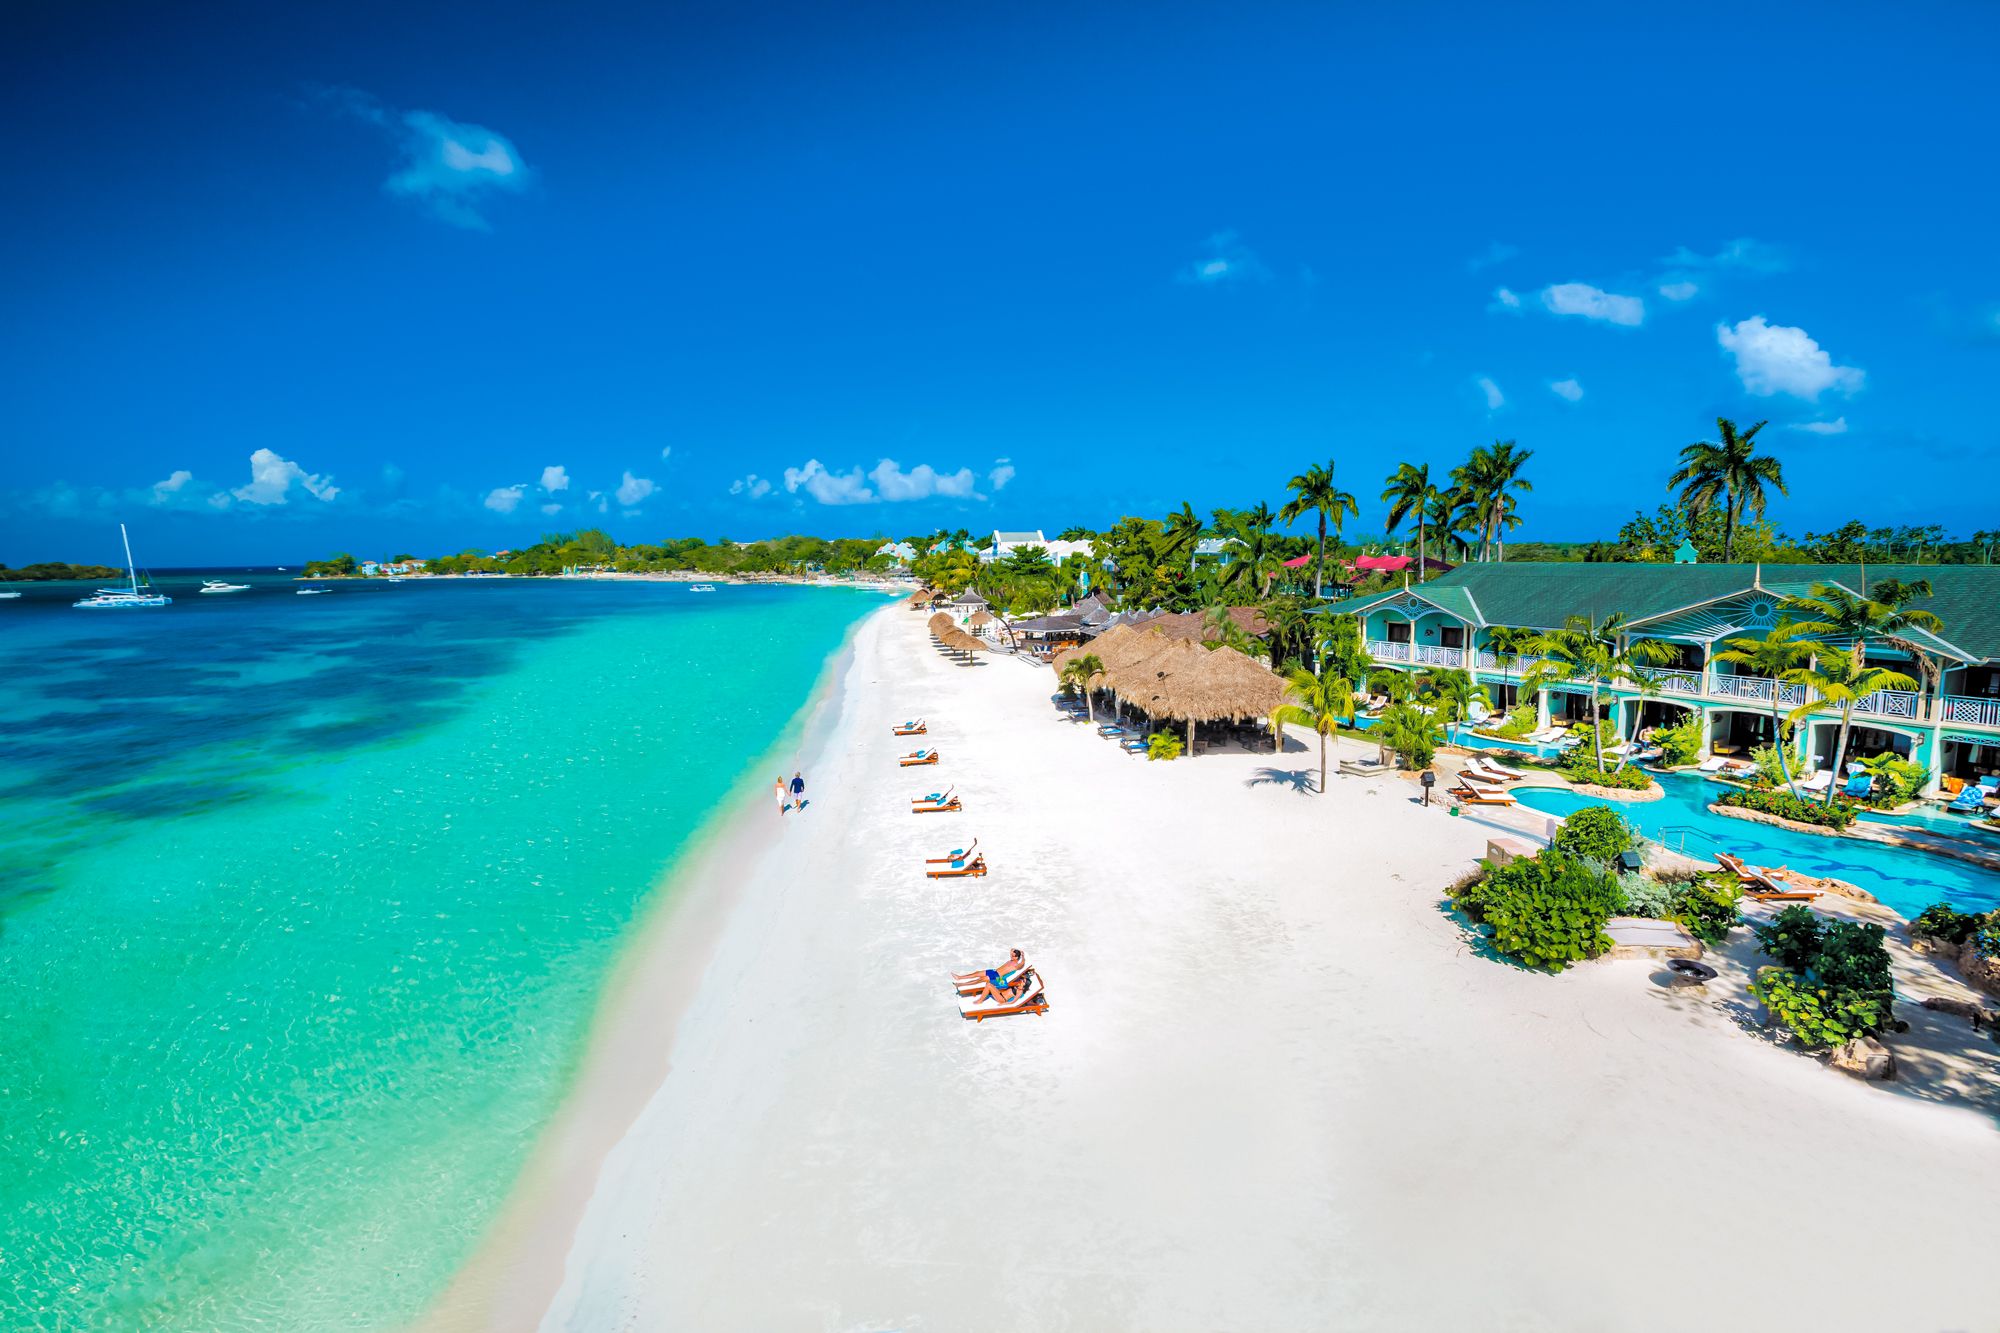 Sandals Negril Beach Overview